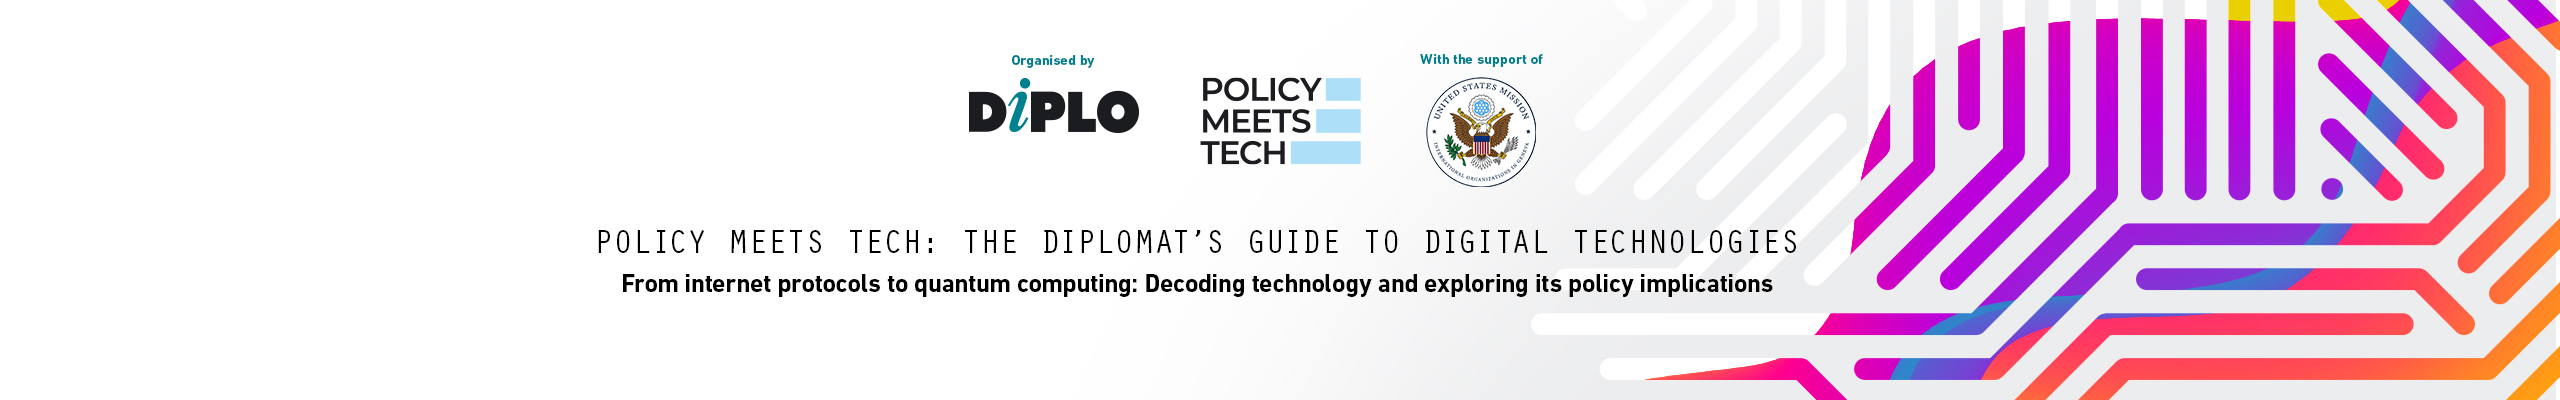 Policy meets tech – event on encryption